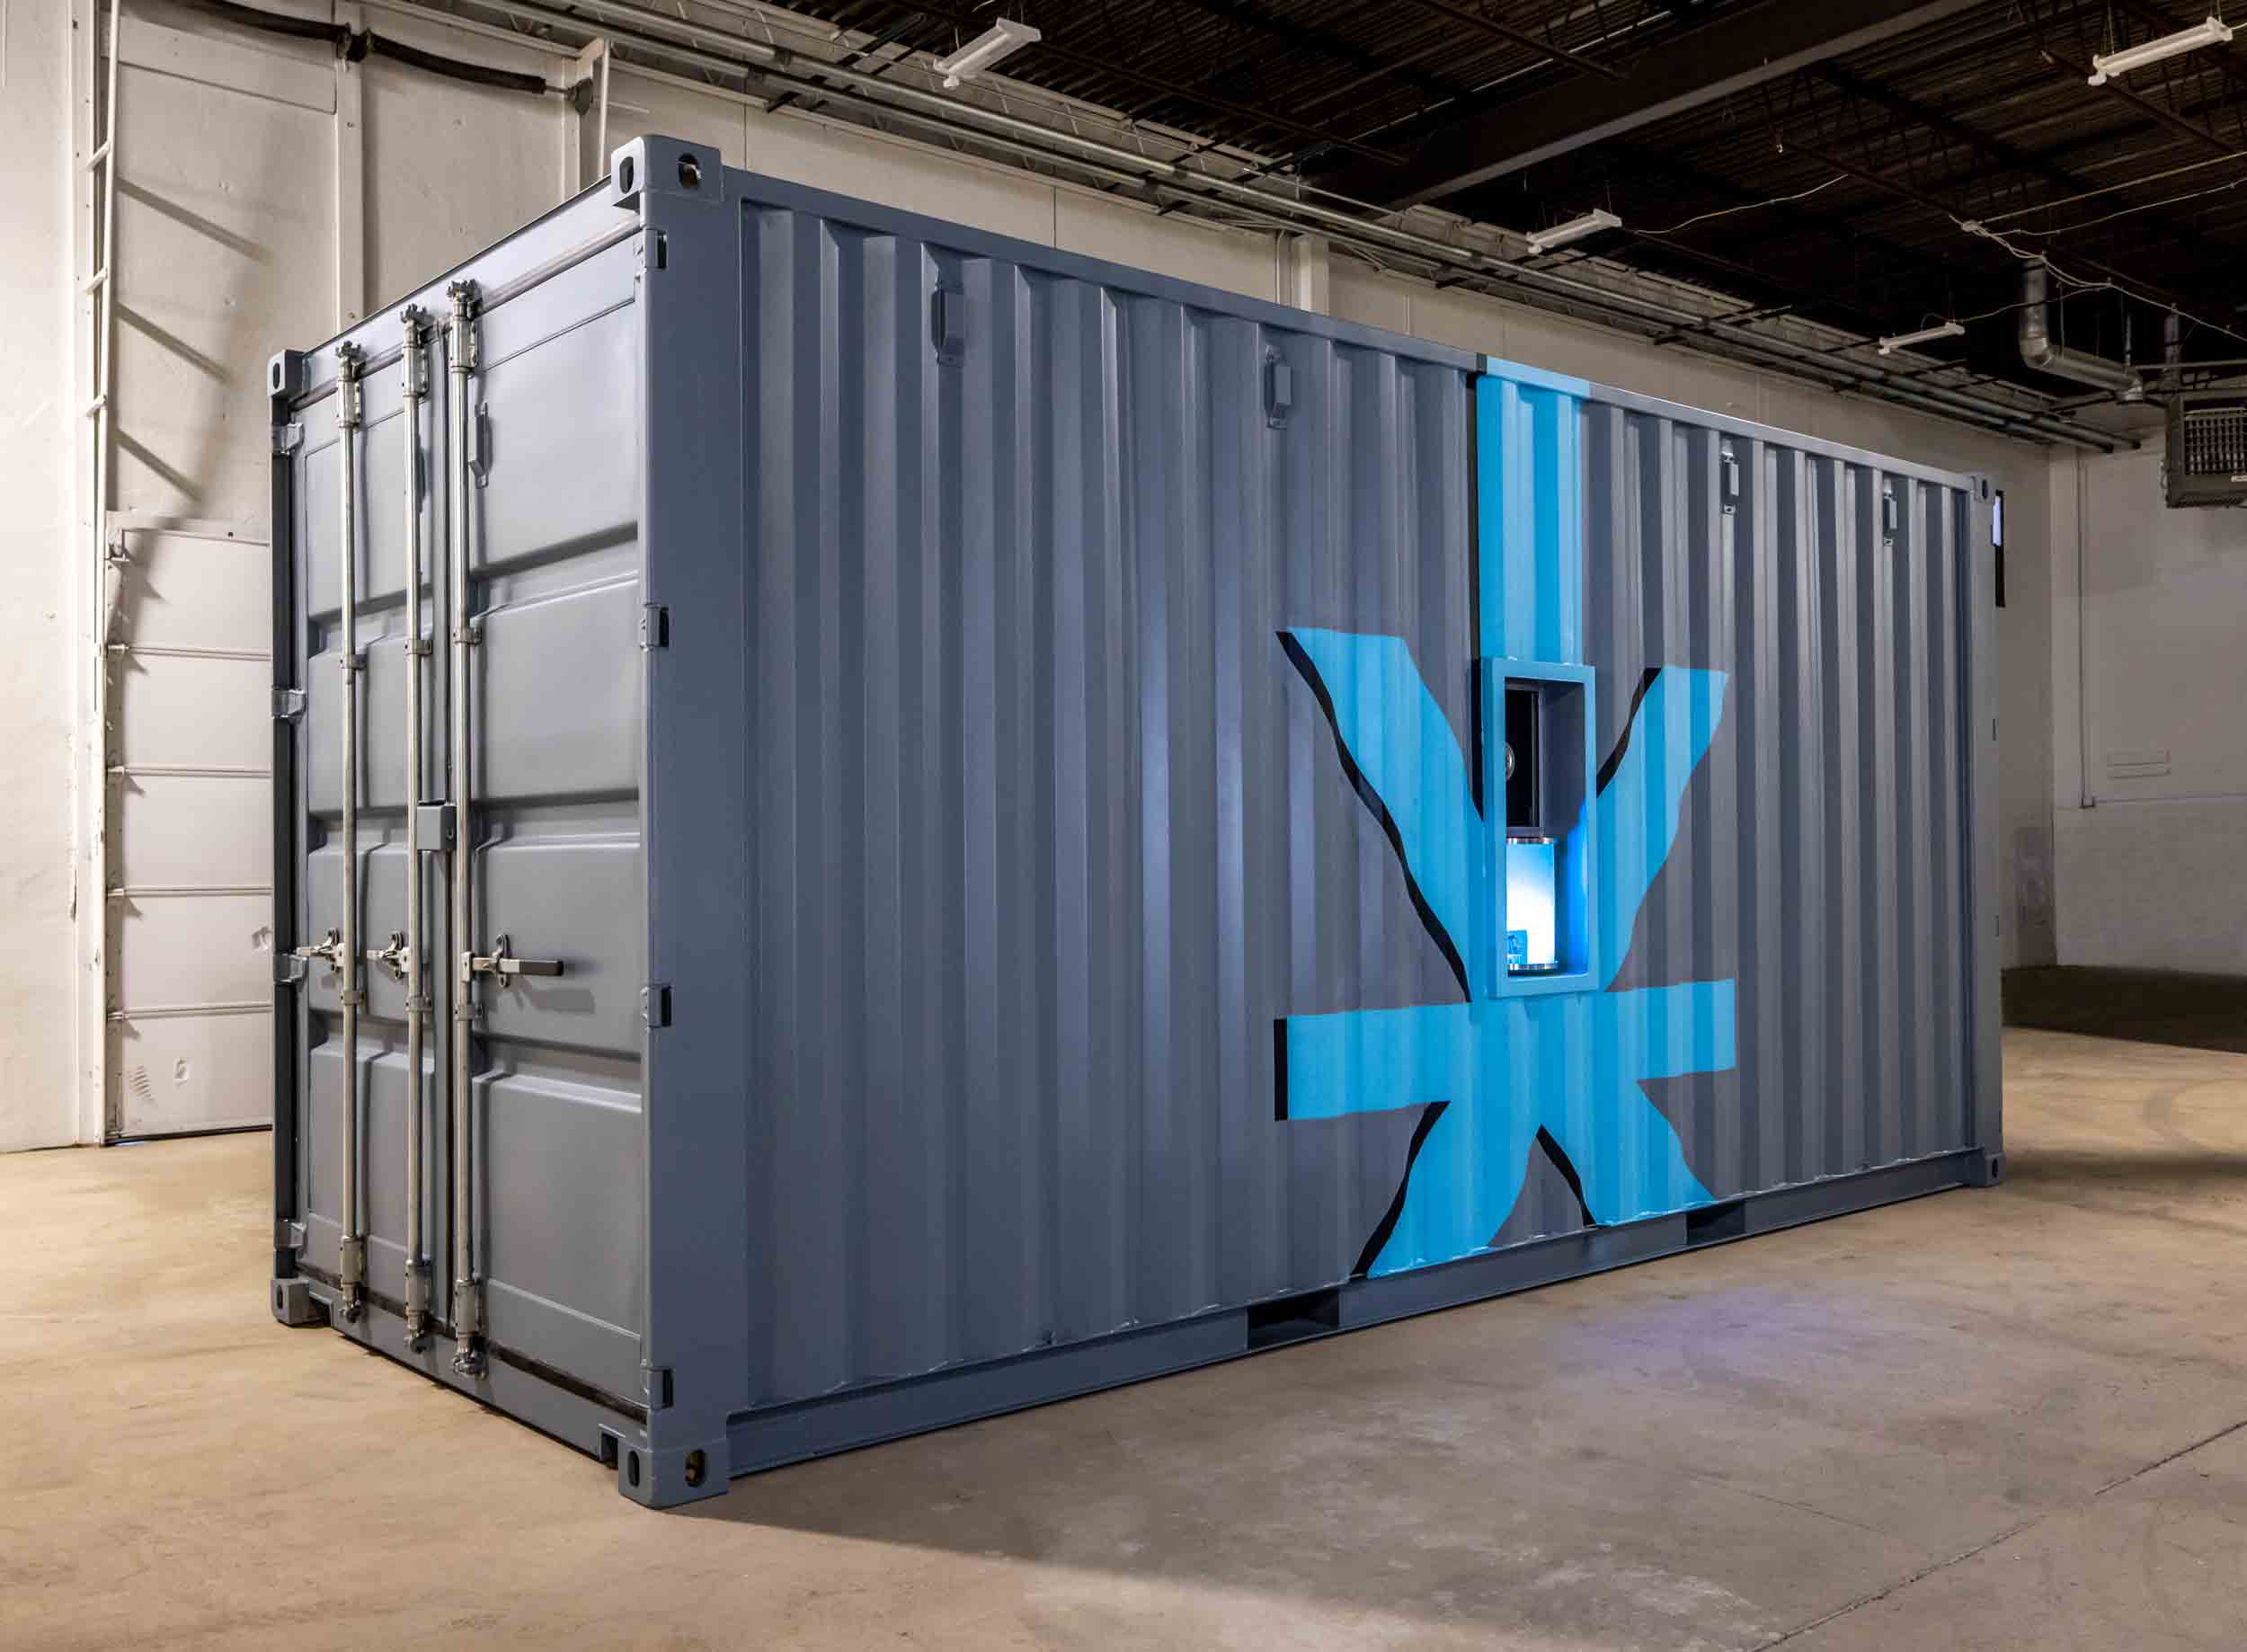 ROXBOX Containers launches RxBX, a line of custom cannabis shipping containers, including dispensaries, consumption lounges, research, cannabis, and more.